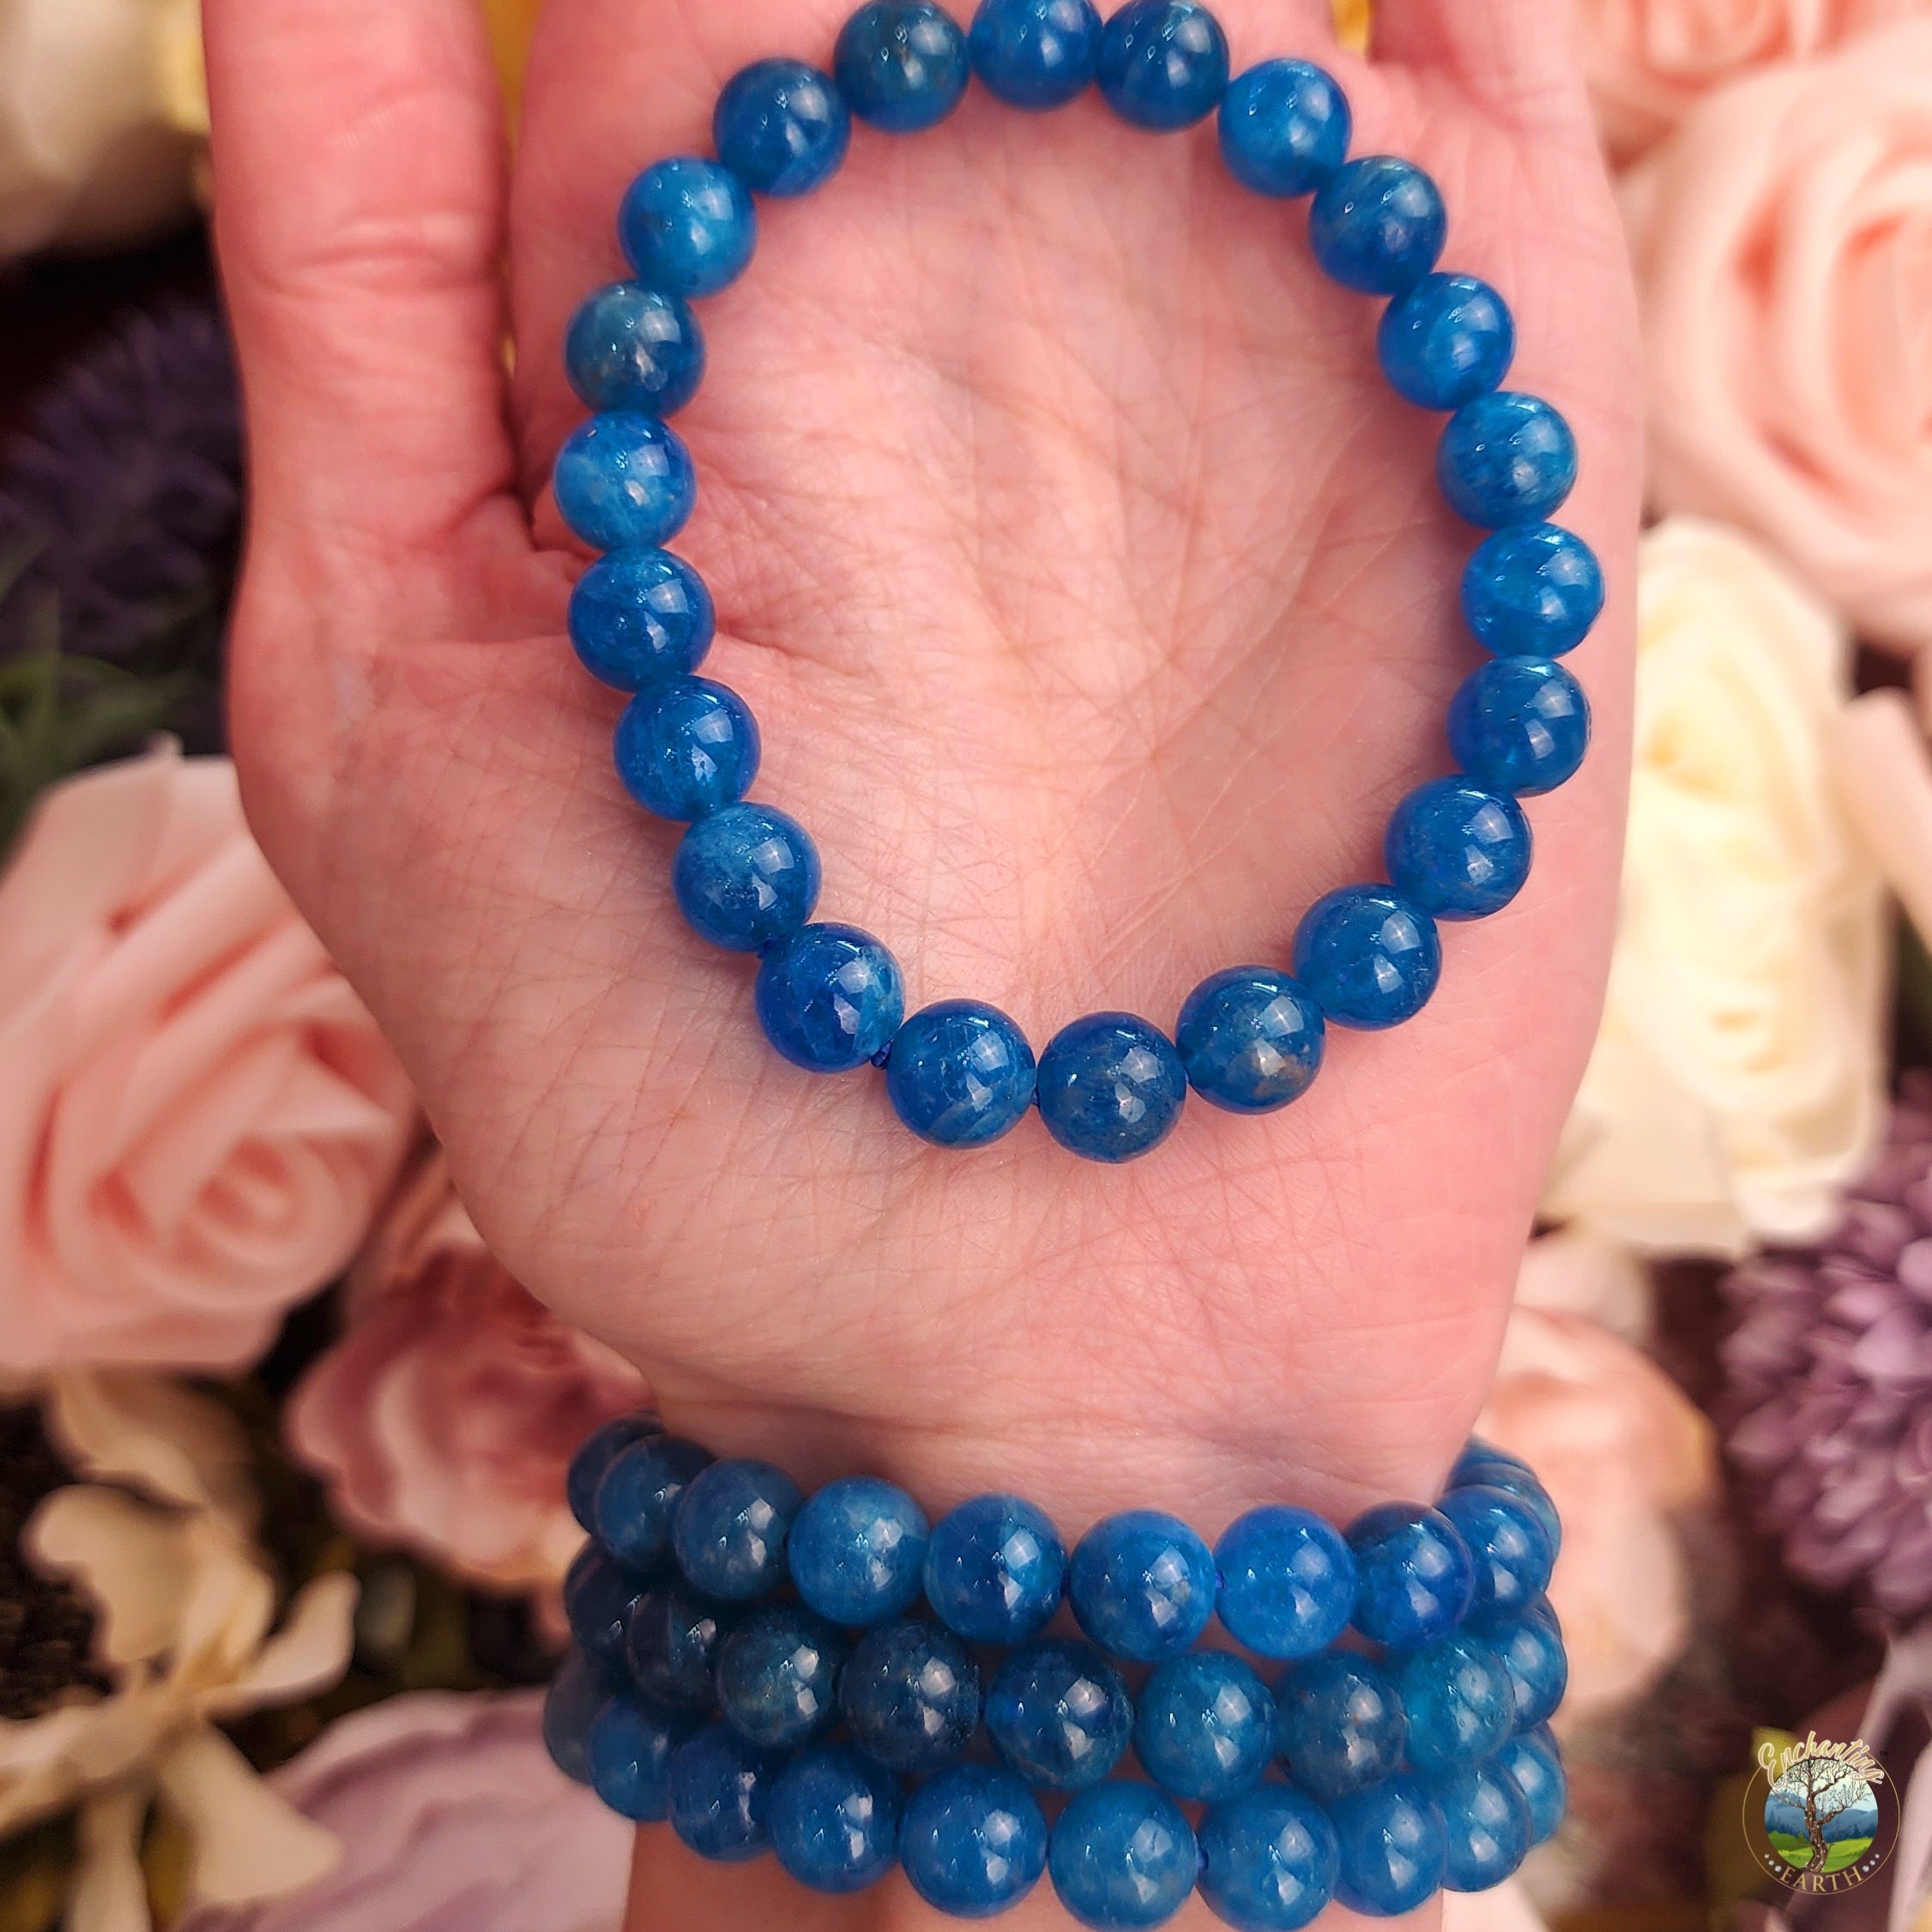 Blue Neon Apatite Bracelet for Connection, Healthy Weight Loss and Overall Wellness